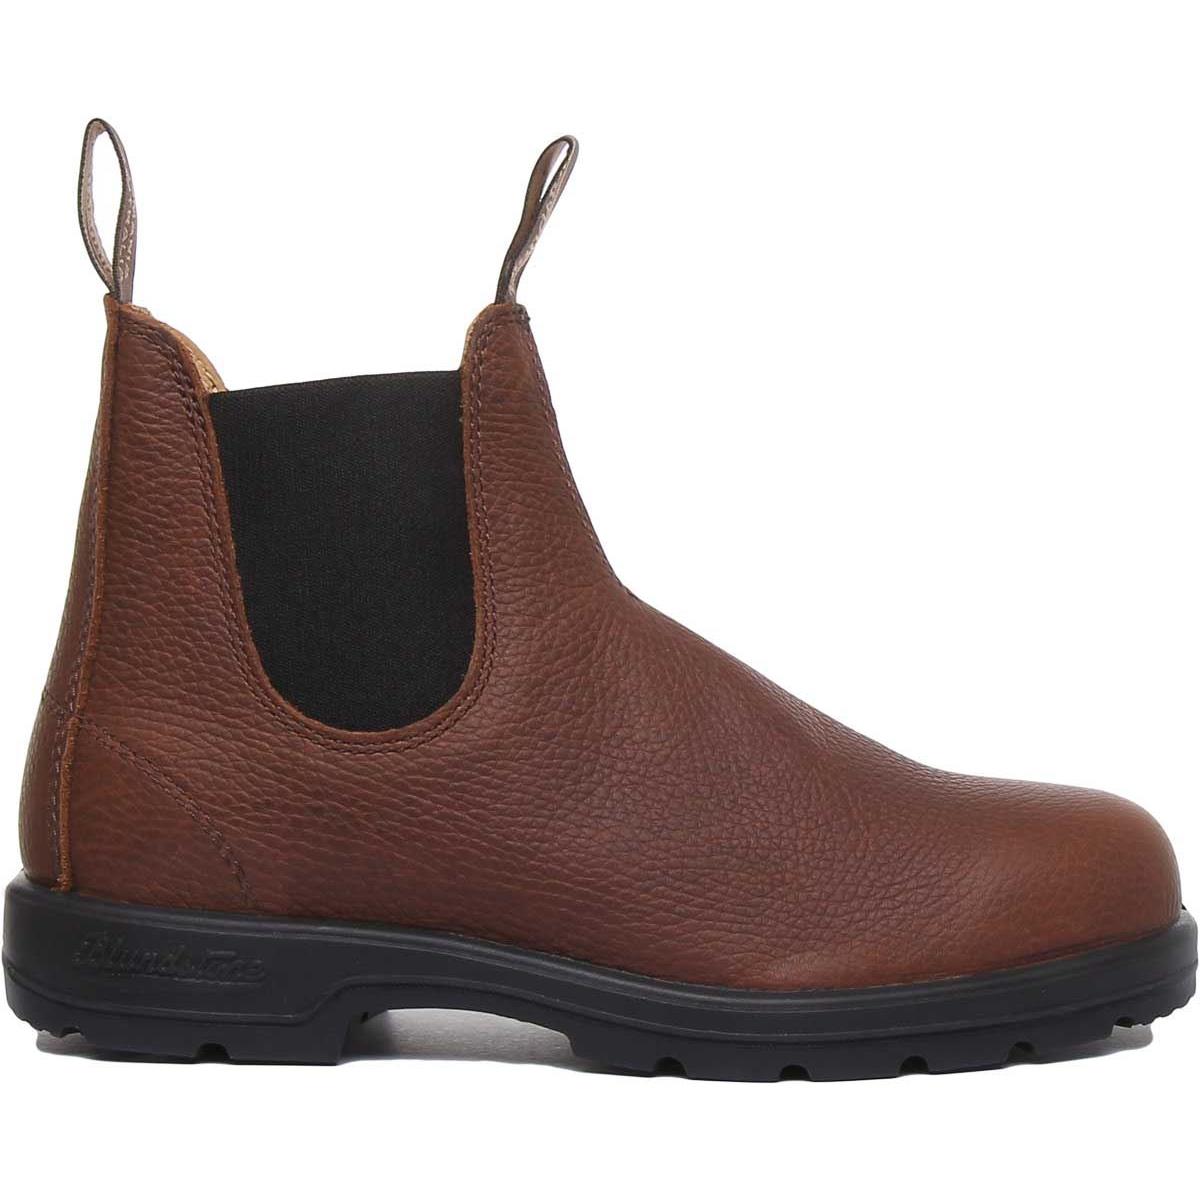 Blundstone 1445 Leather Lined In Pebbled Brow In Brown Size US 7 - 13